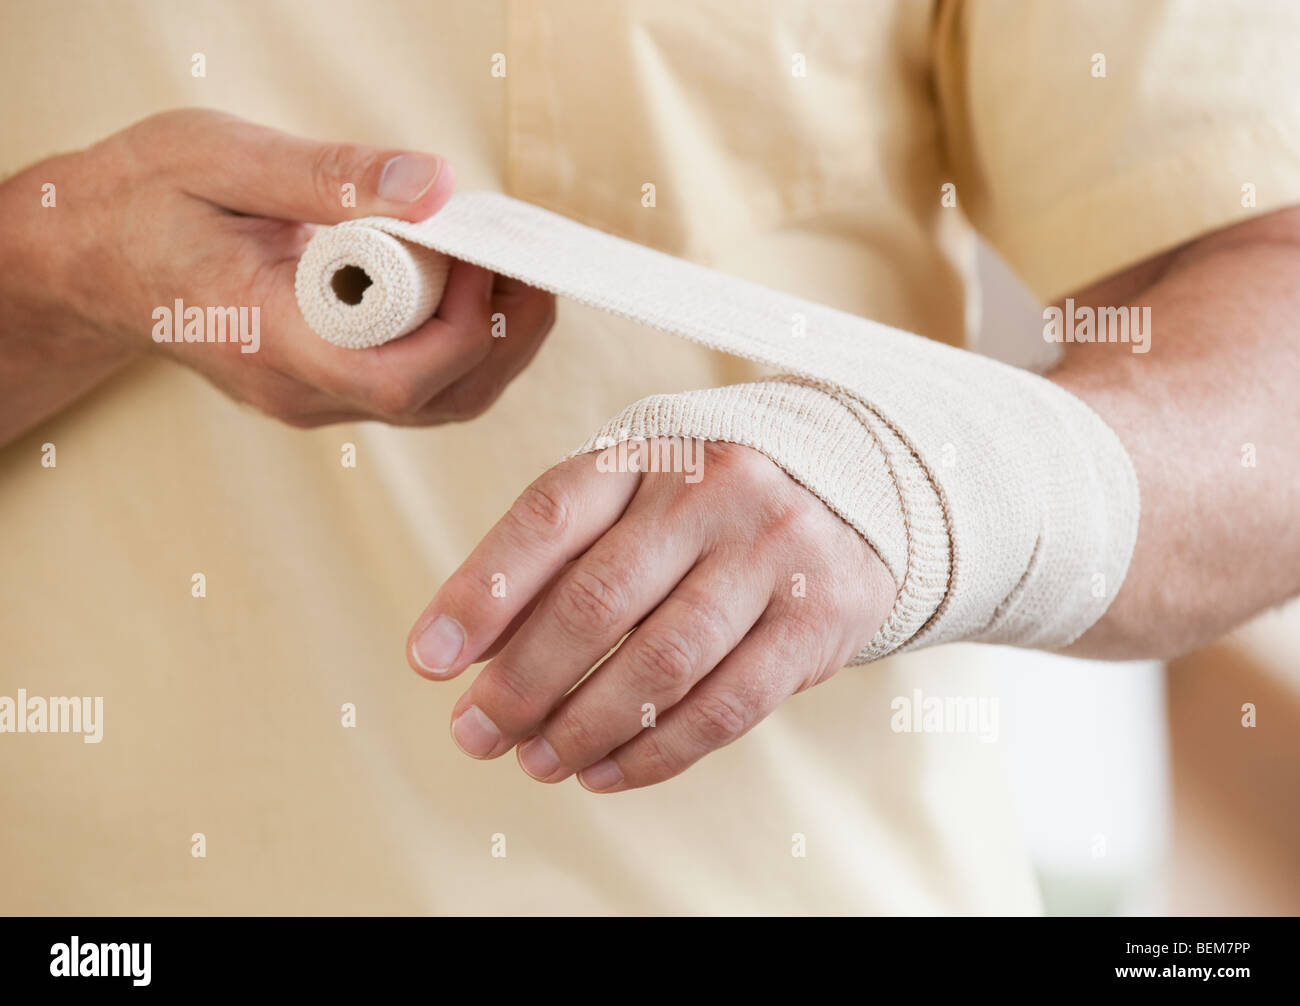 Man wrapping hand in tensor bandage Stock Photo